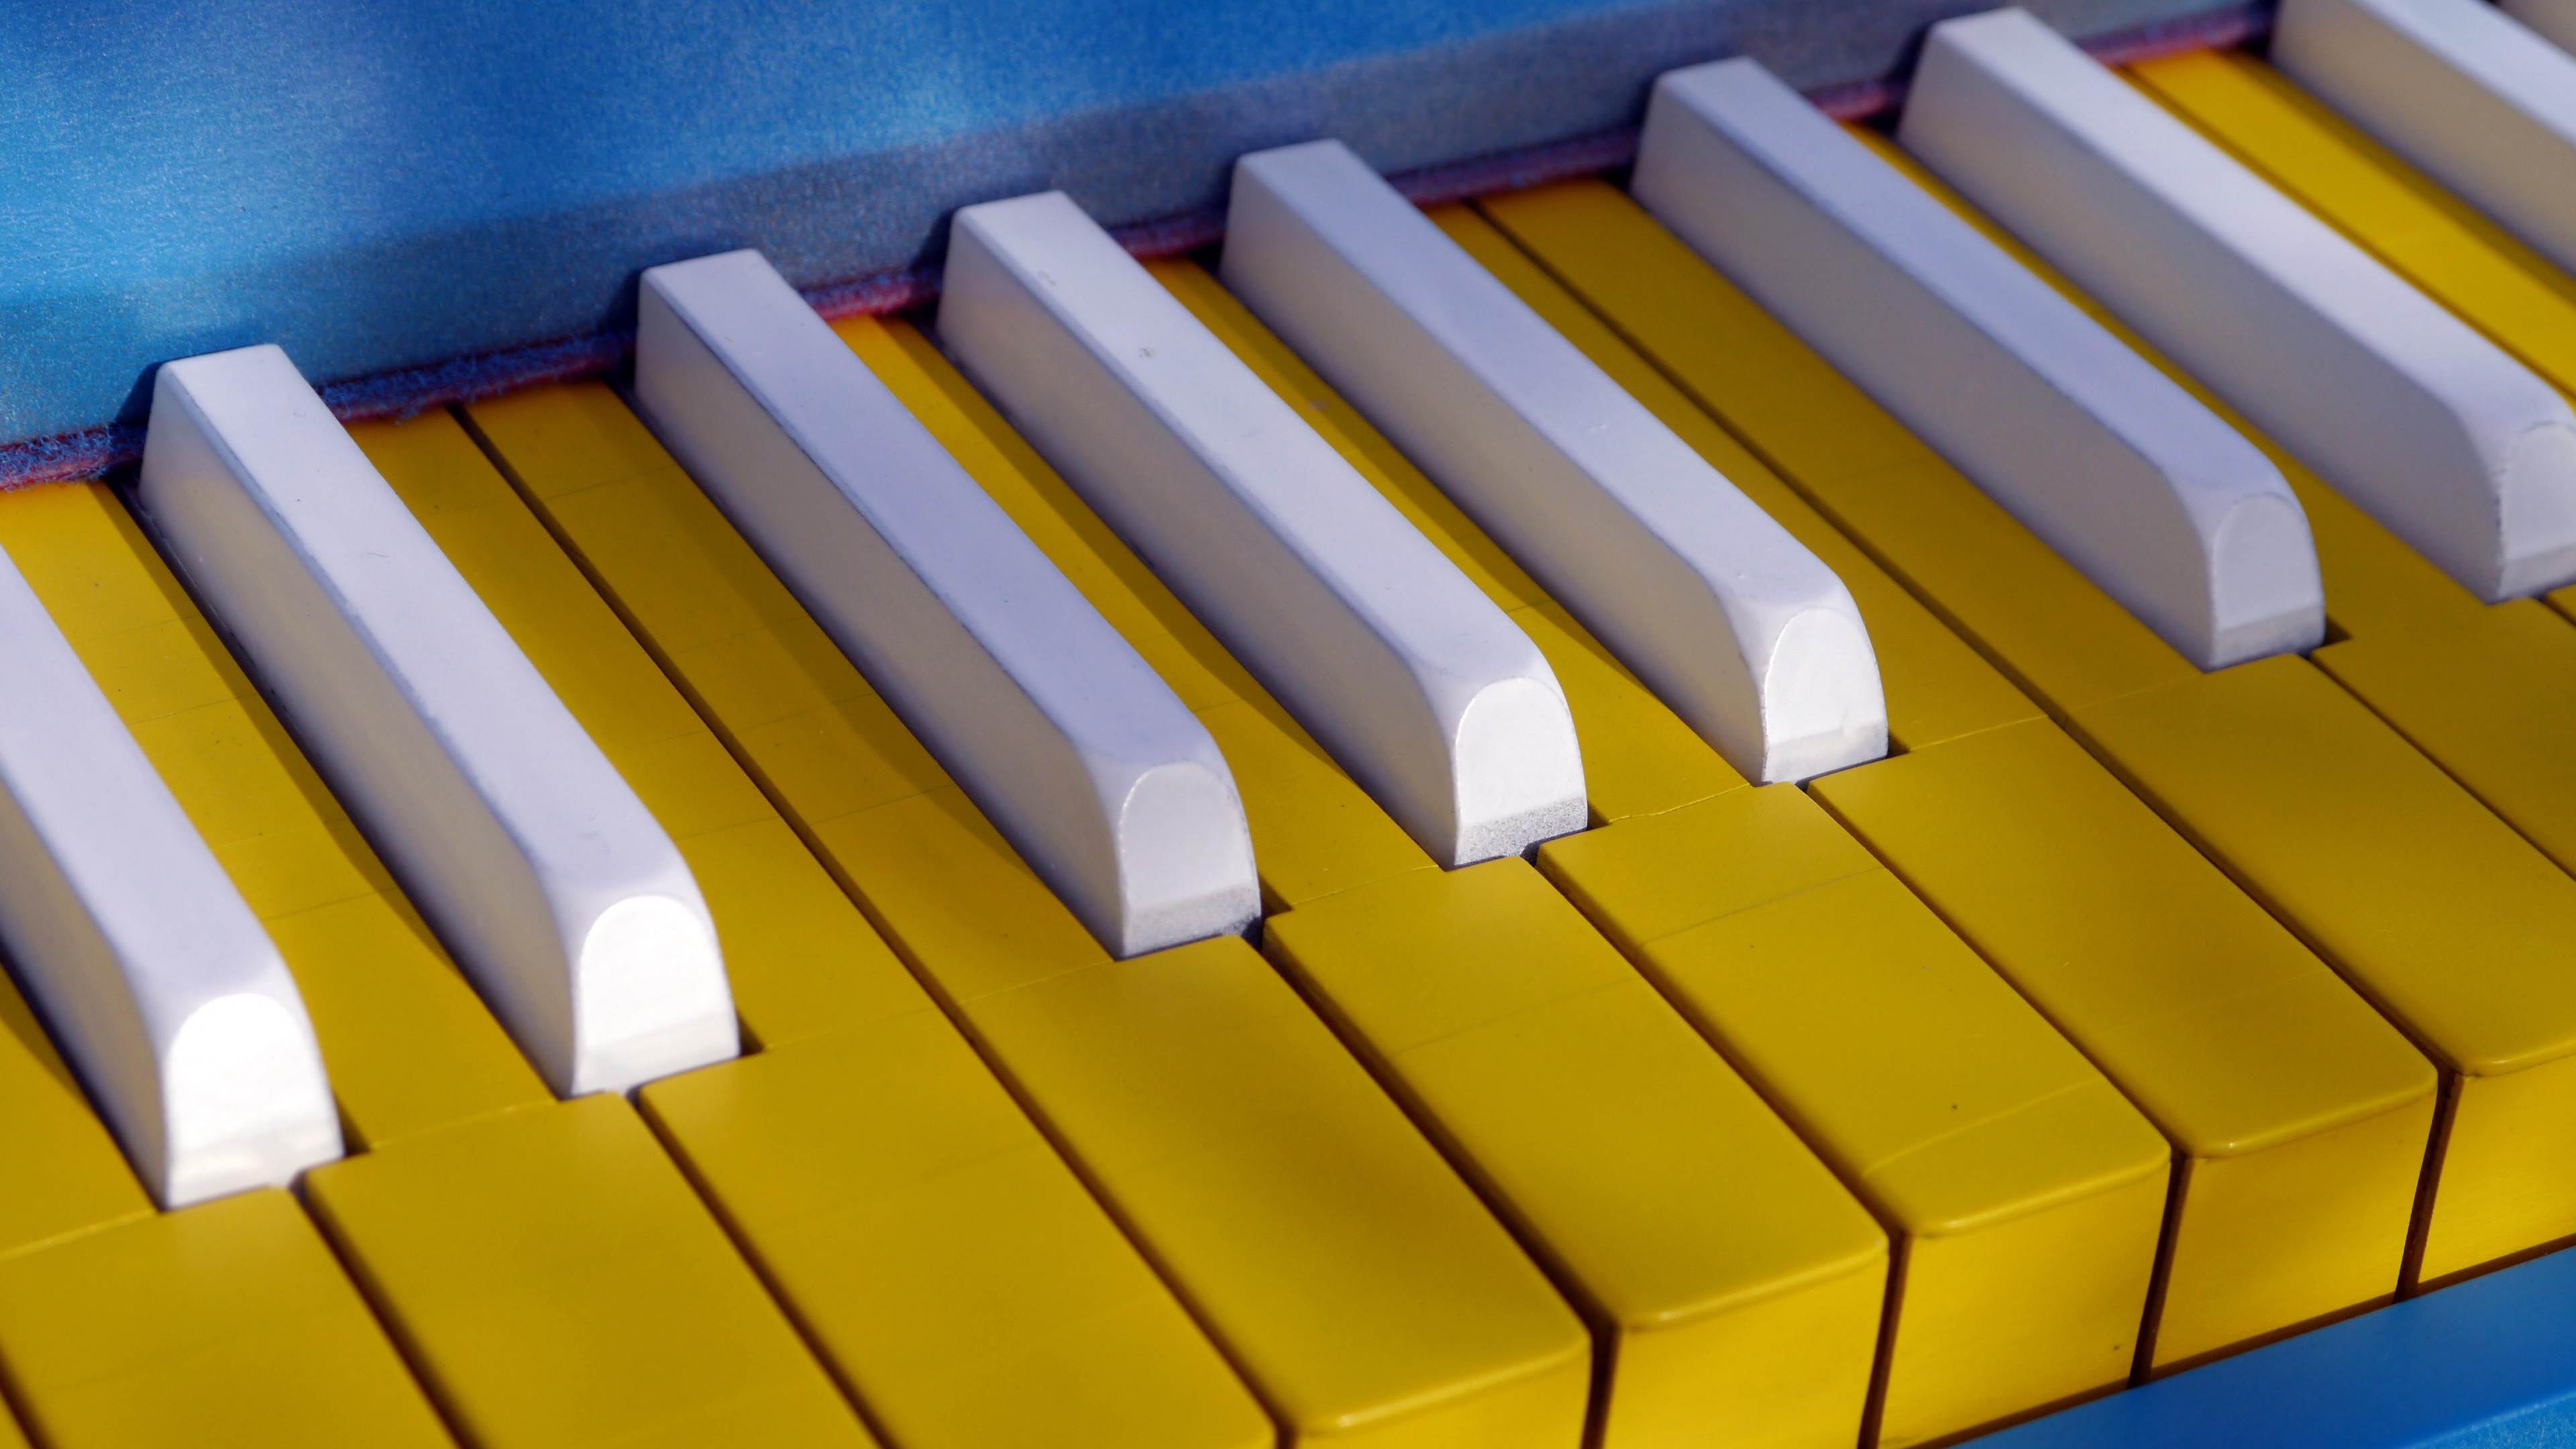 Piano: Modern Design Of Keys, Classical Musical Instrument In A New Format. 3840x2160 4K Background.